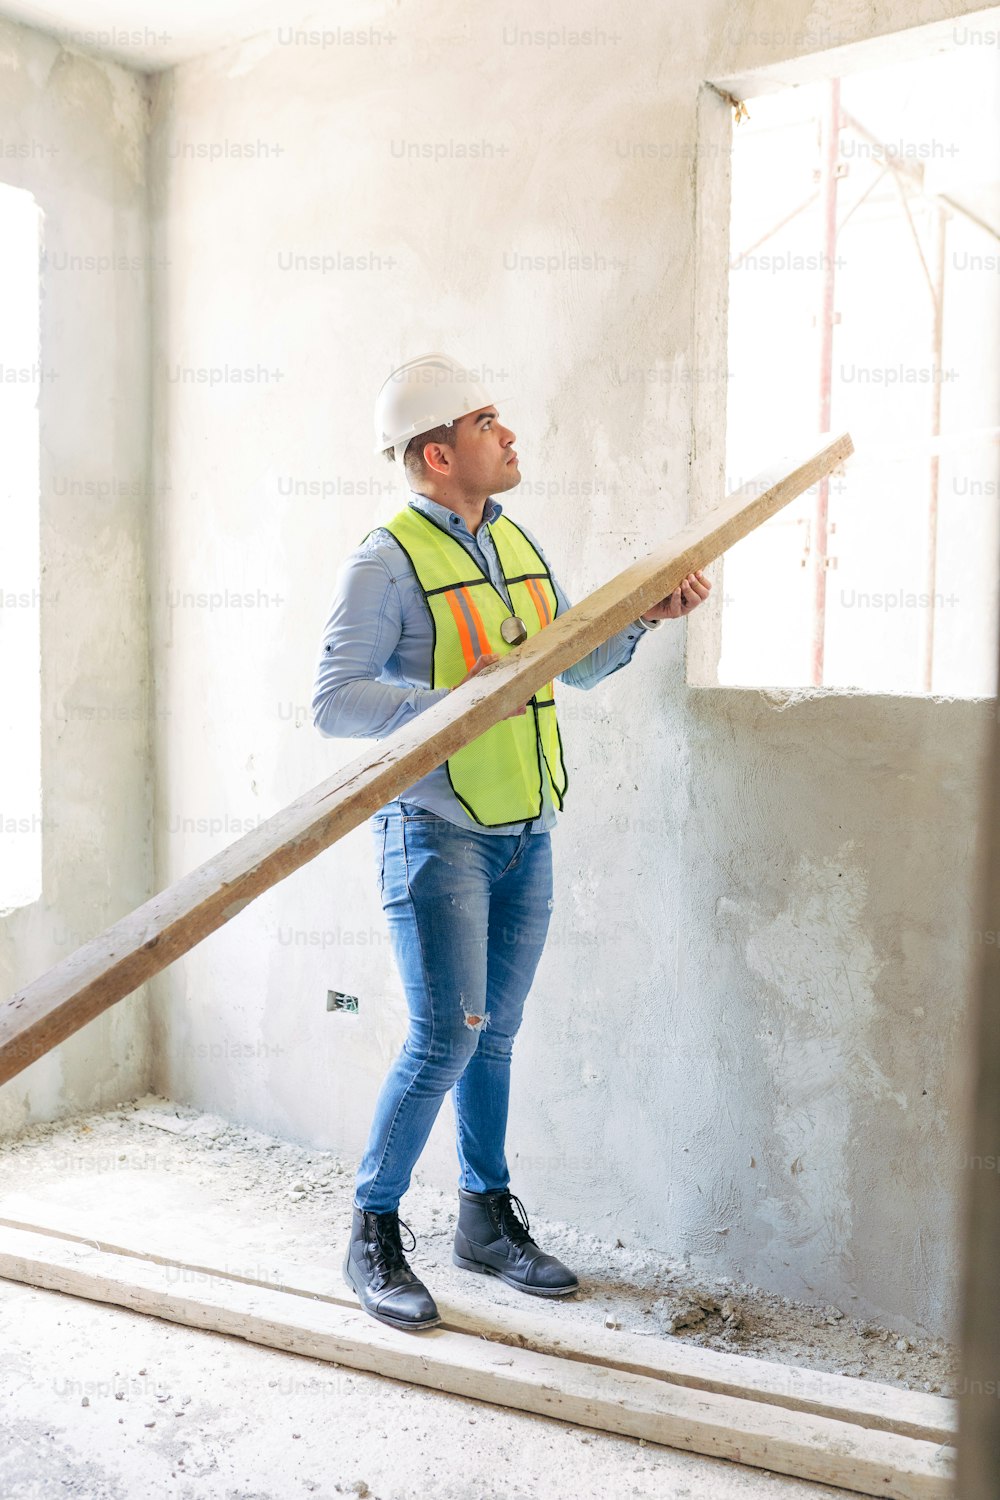 a man in a hard hat and safety vest standing in a room under construction